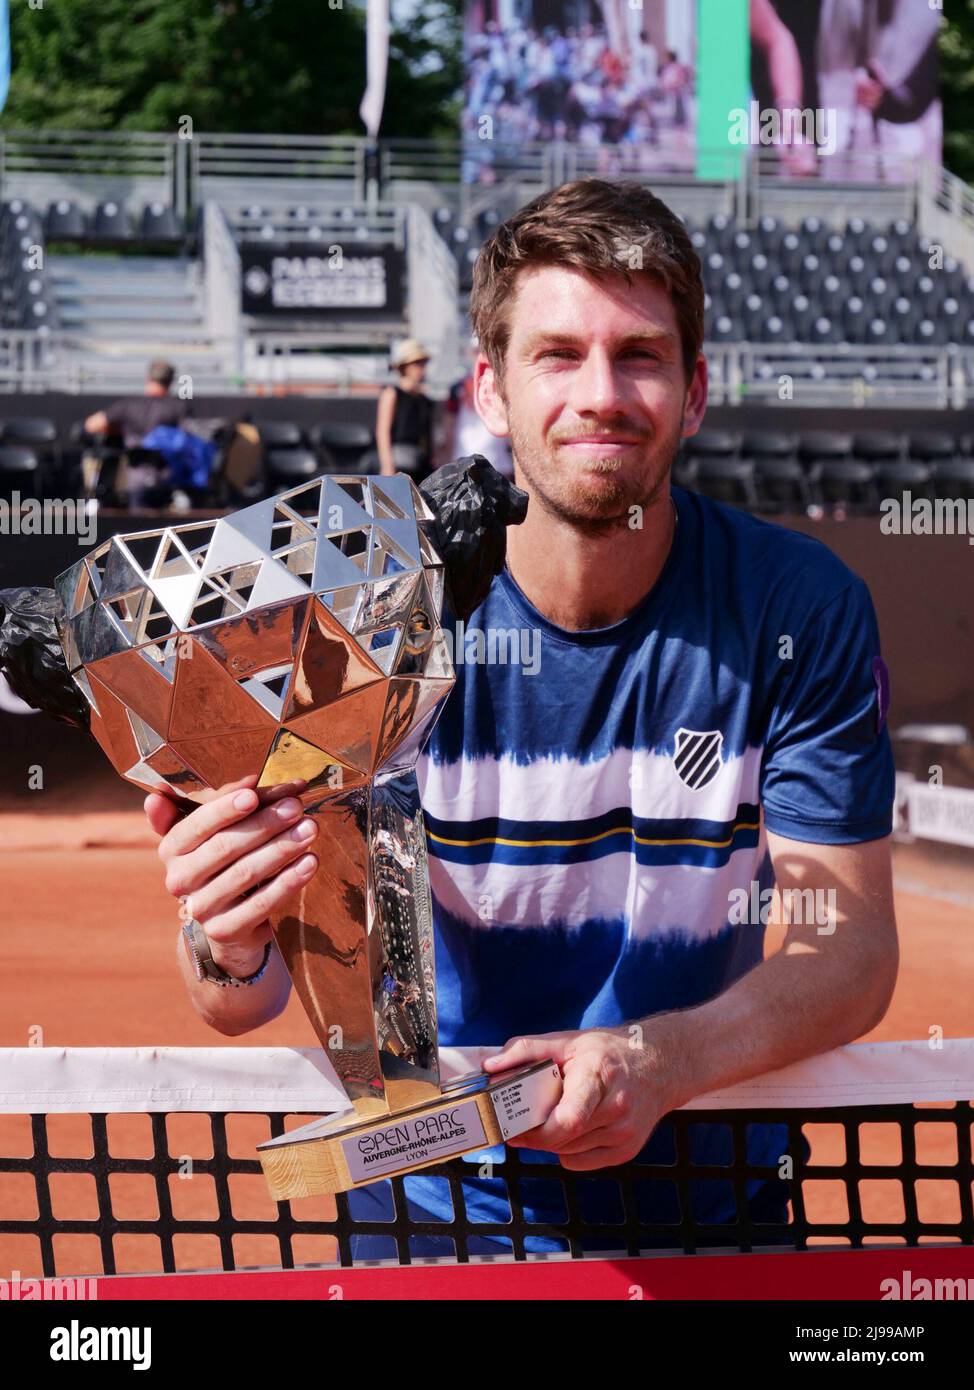 Cameron Norrie (GBR) celebrates after winning against Alex Molcan (SVK) during the Final of the Open Parc Auvergne-Rhone-Alpes Lyon 2022, ATP 250 Tennis tournament on May 21, 2022 at Parc de la